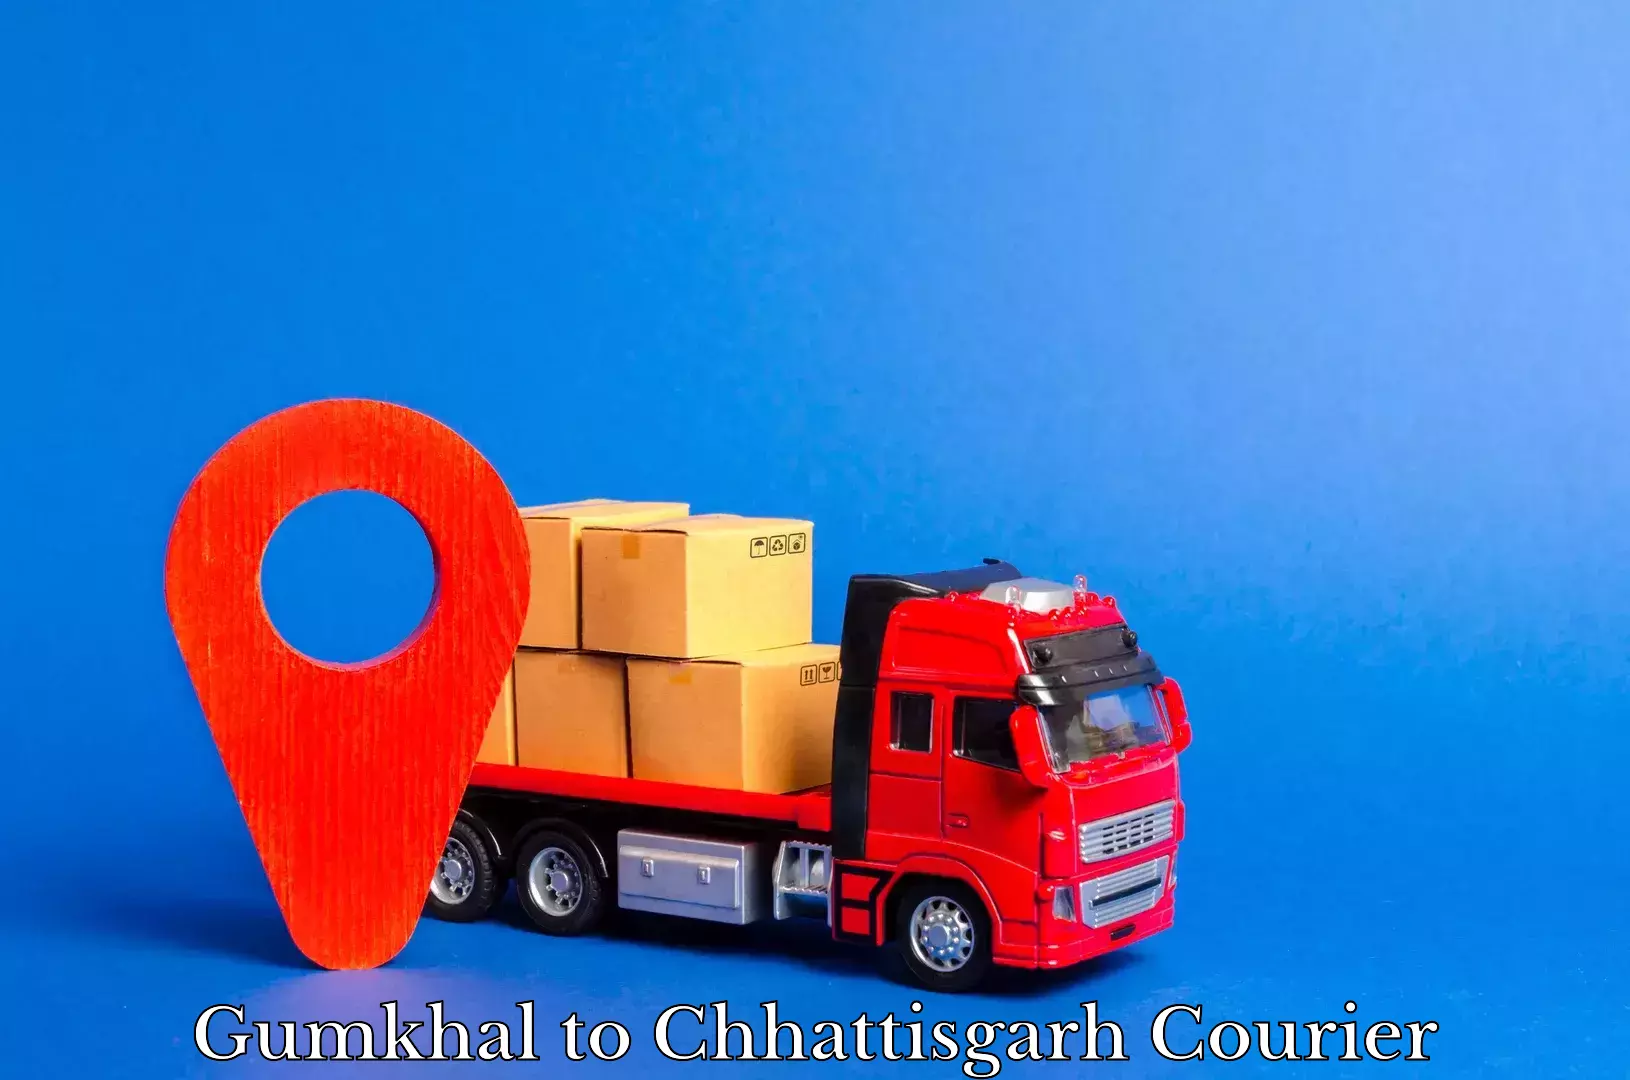 Express delivery solutions Gumkhal to Chhattisgarh